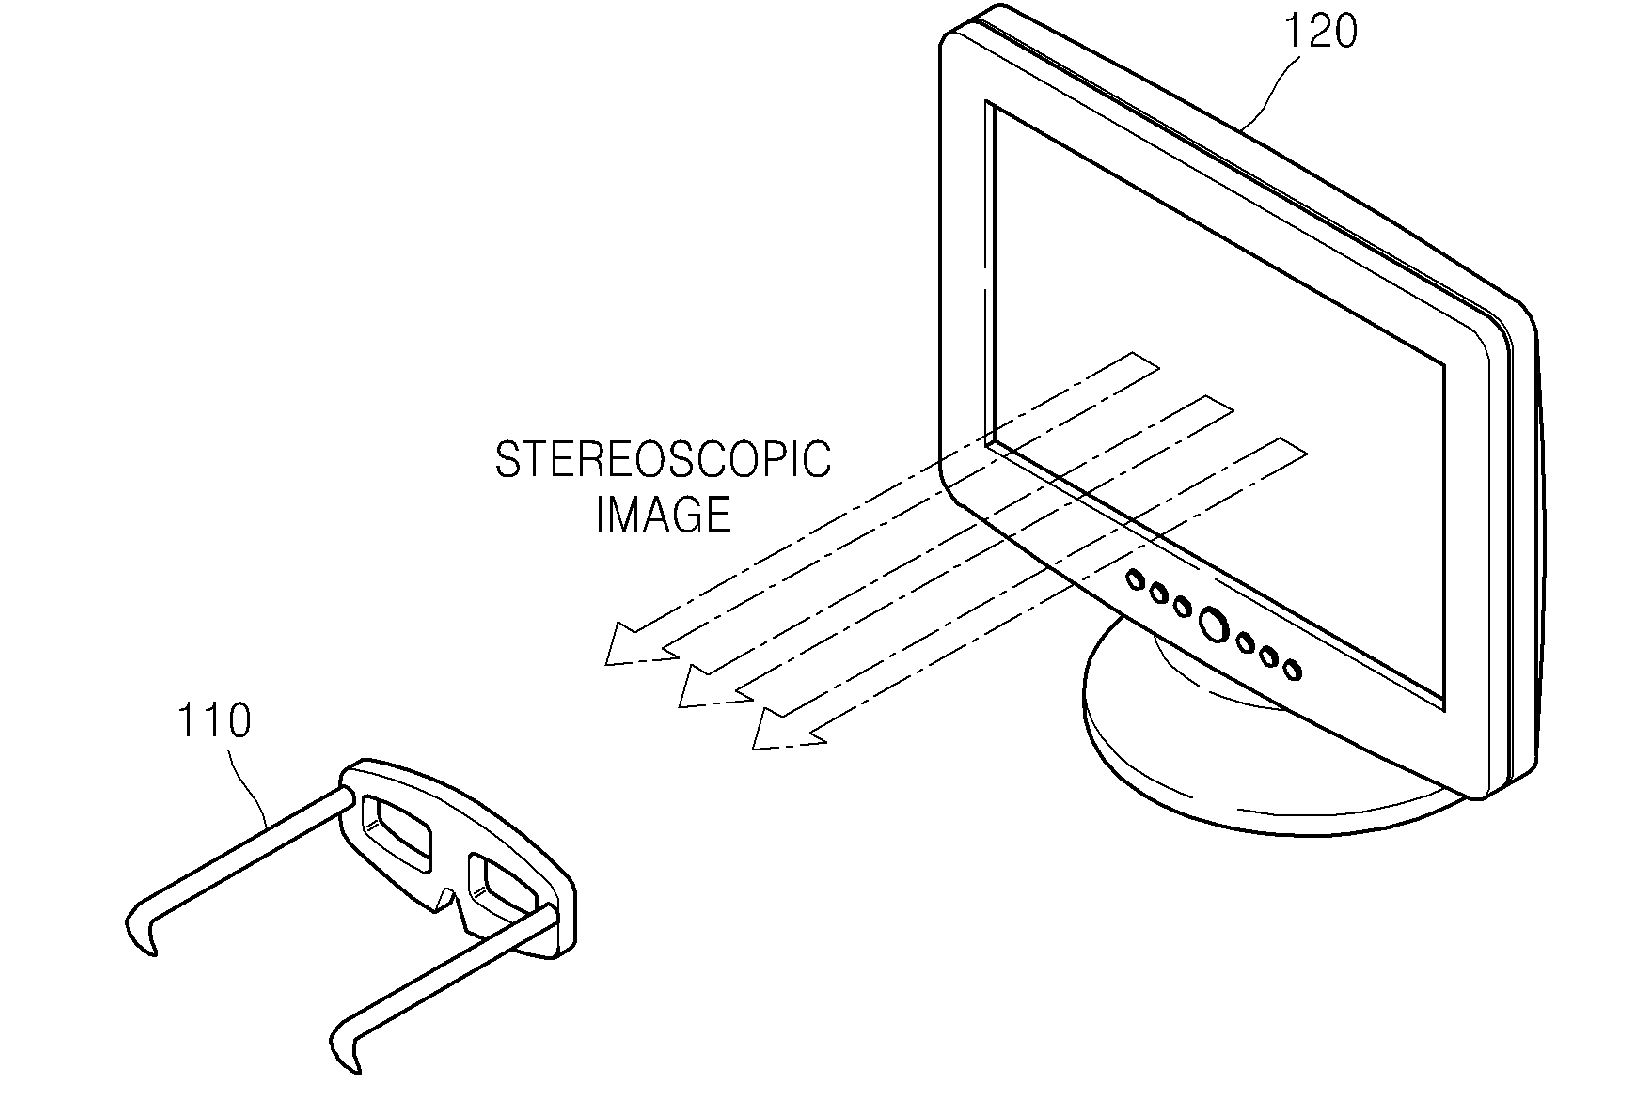 Method and apparatus for displaying stereoscopic image